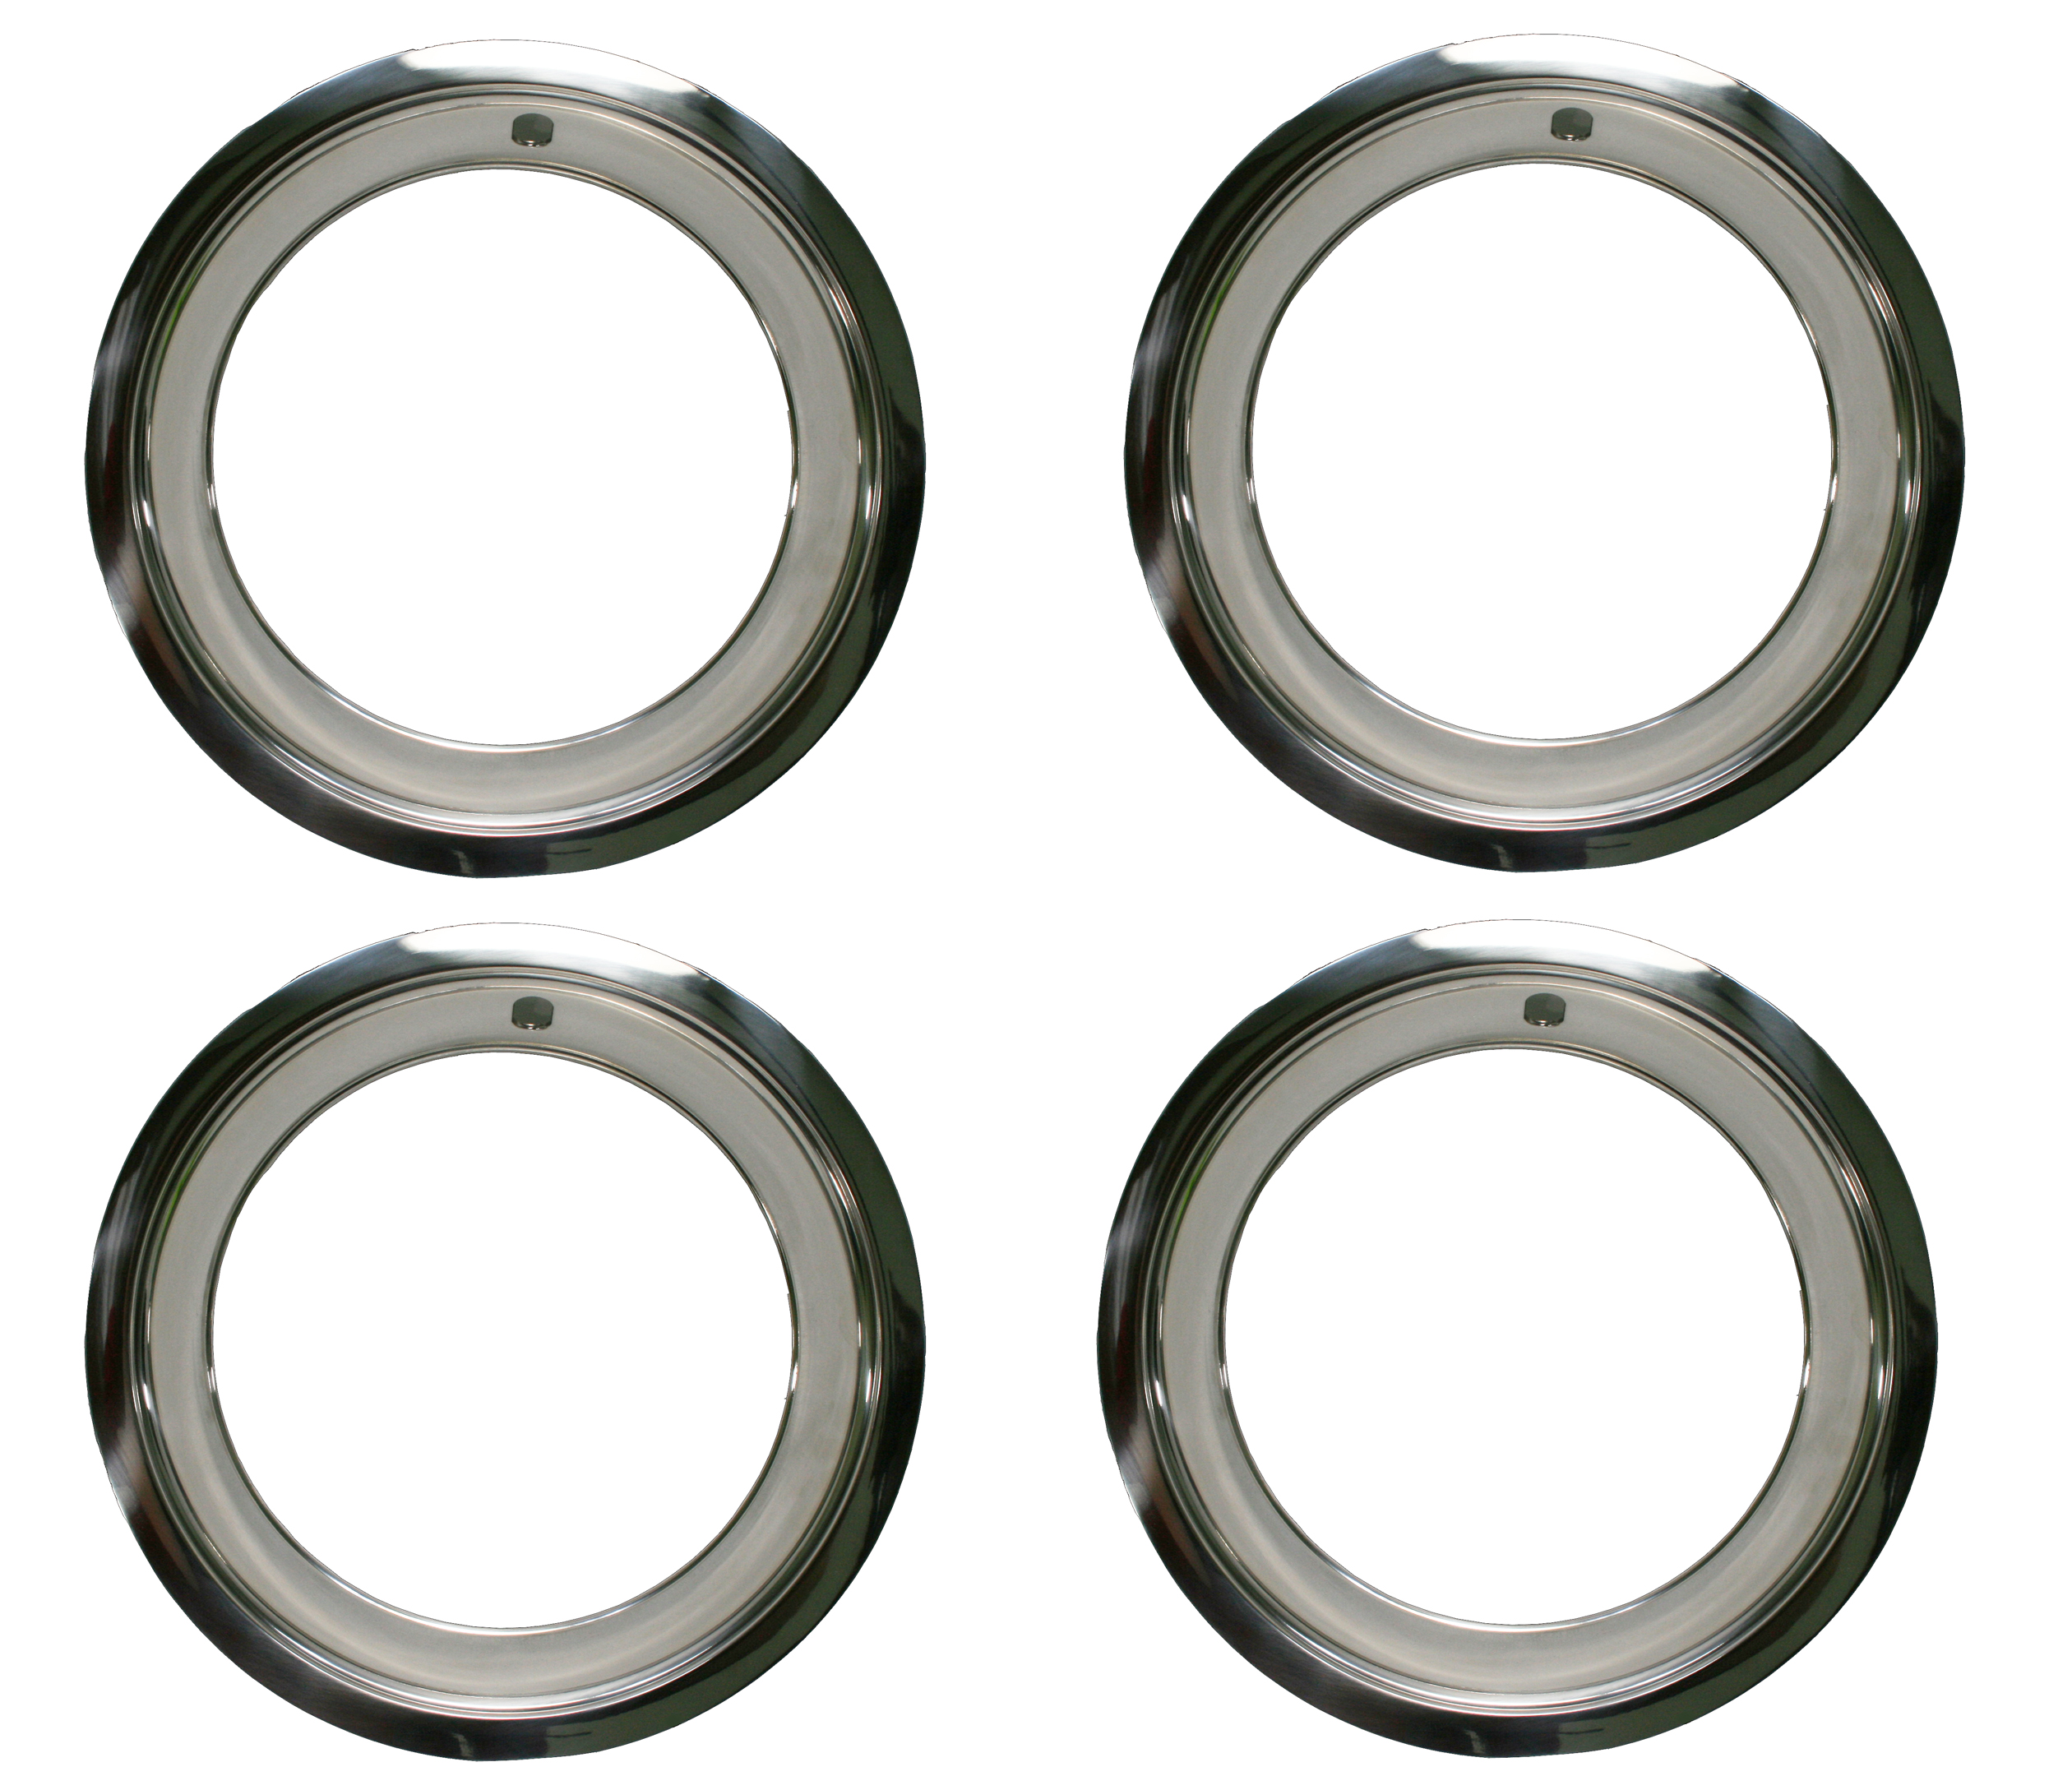 1968-1982 Corvette Rally Trim Rings 4 Piece Set with Correct Clips